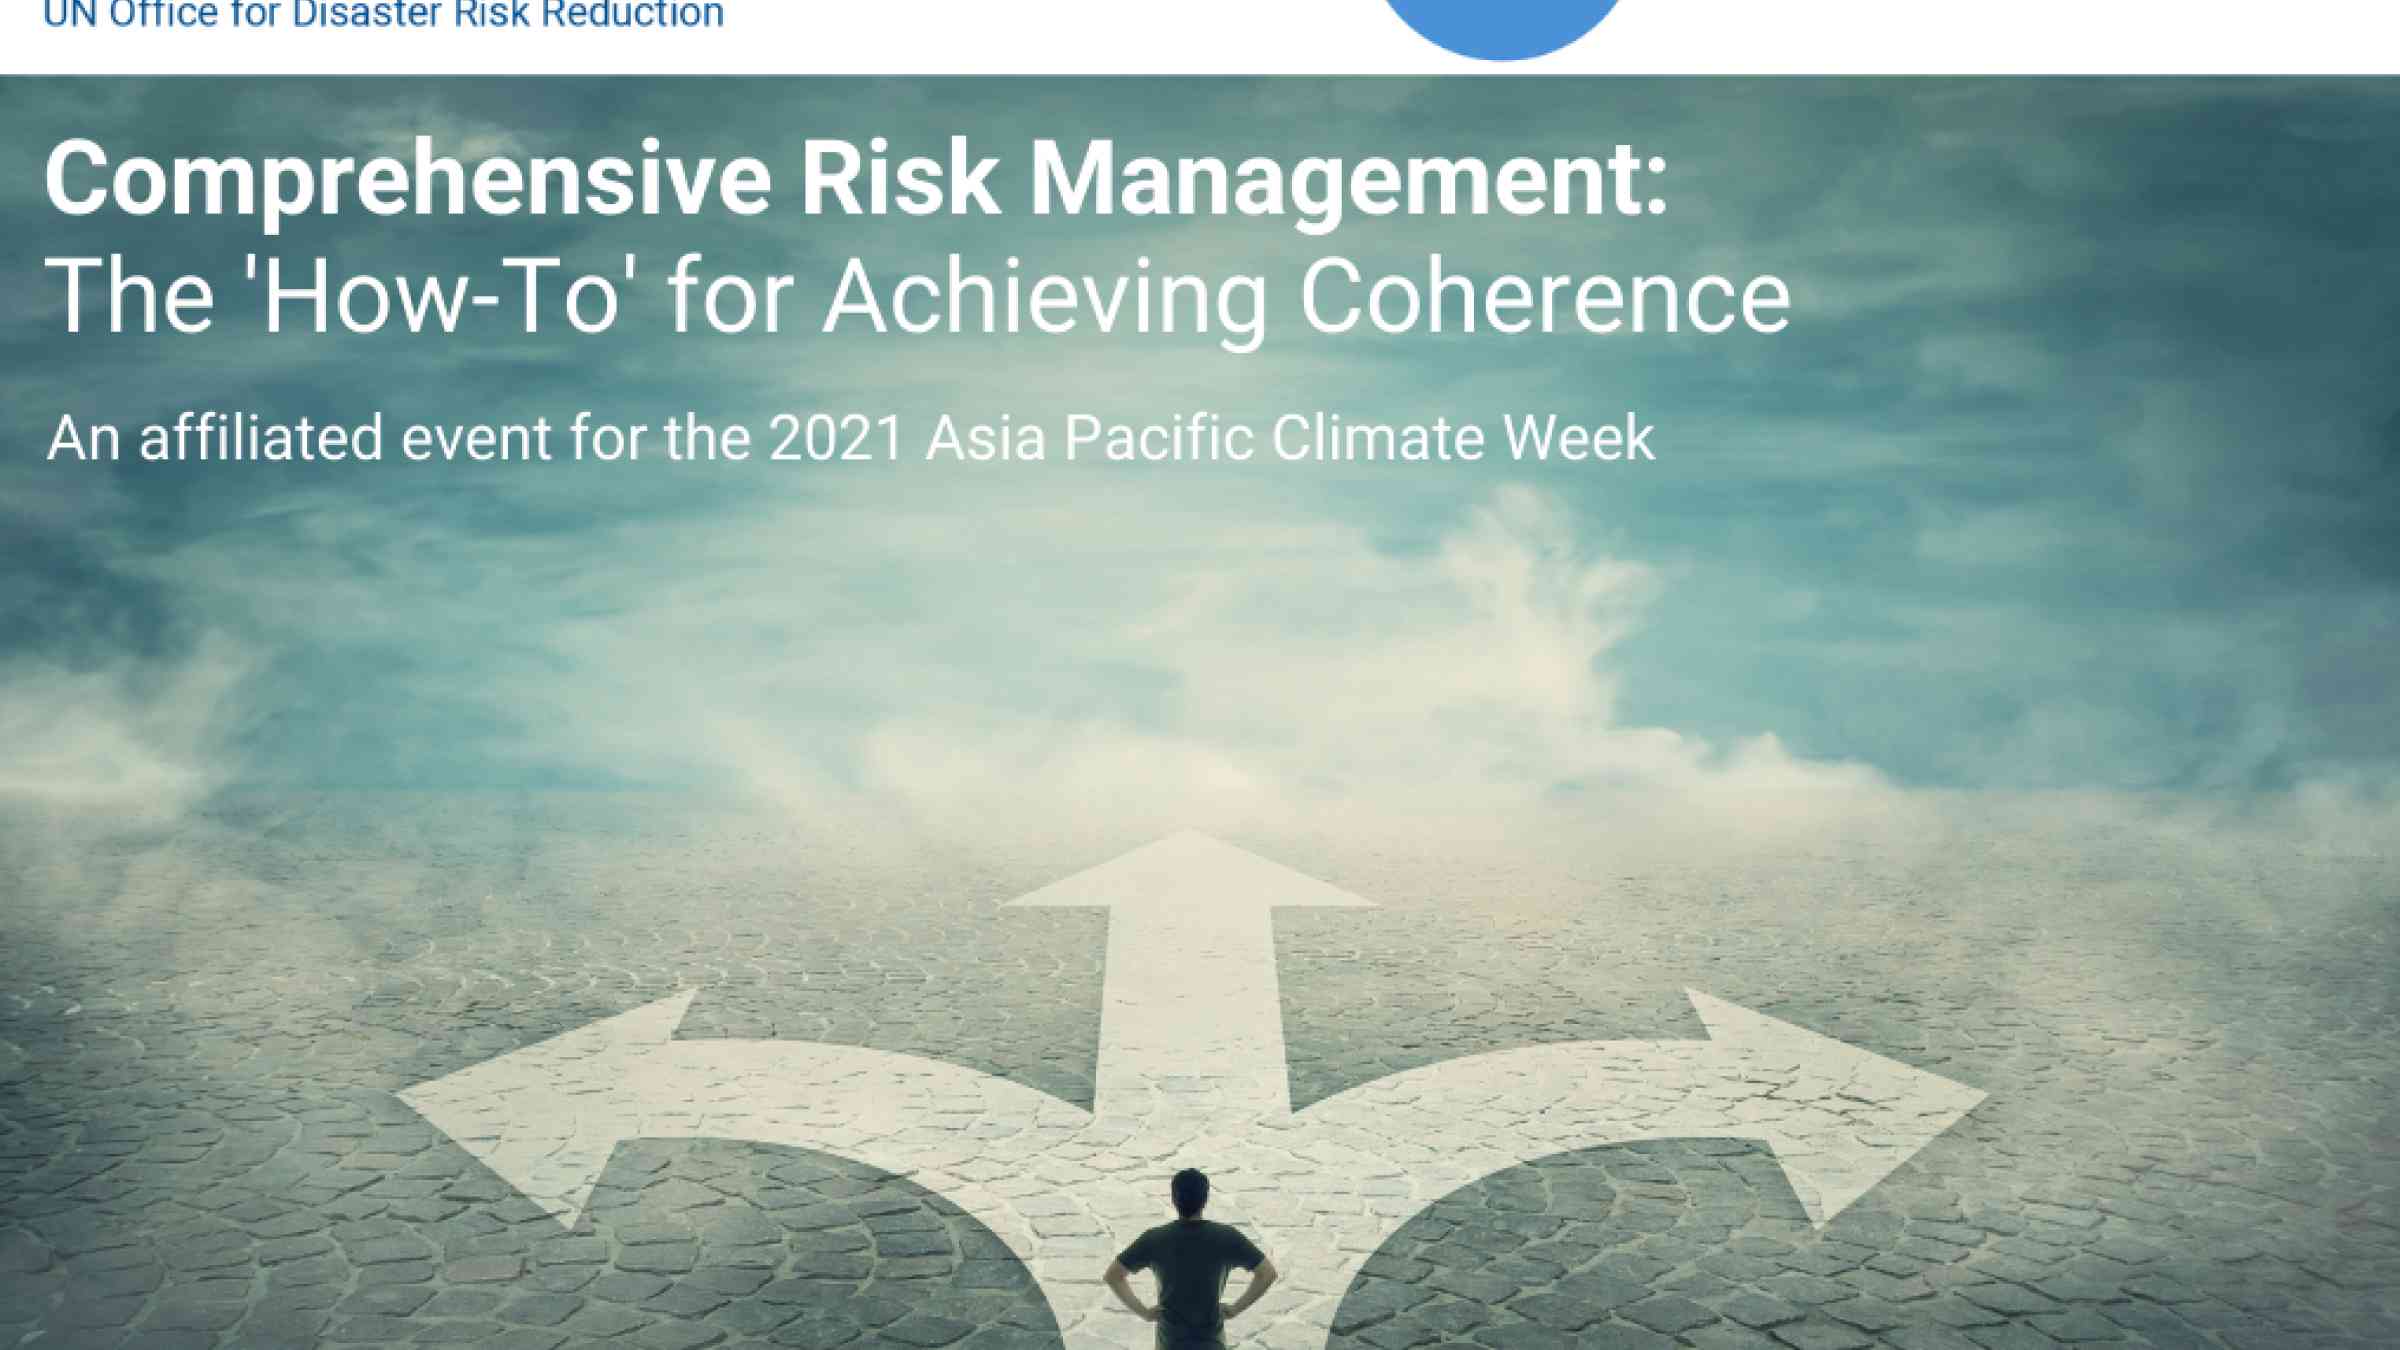 Copy of event for the 2021 Asia Pacific Climate Week